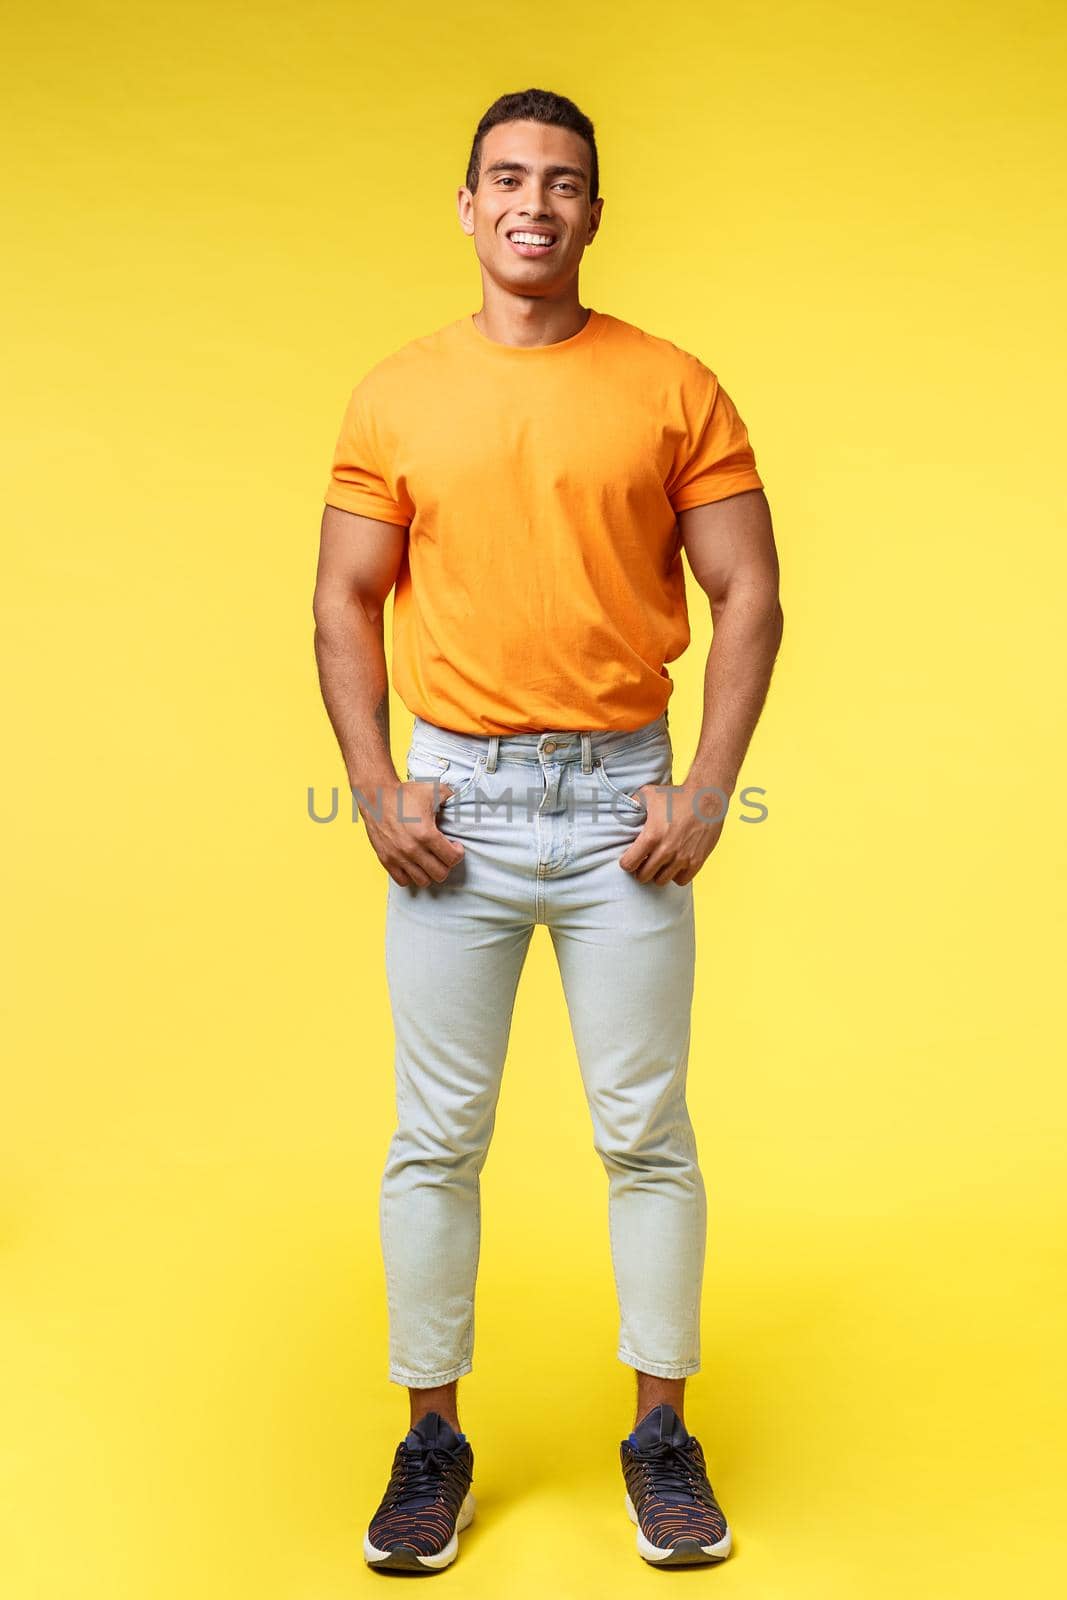 Vertical full-length studio shot young hipster guy with mascular body, standing orange t-shirt and white pants, hold hands in pockets, smiling camera pleased and confident, casual pose.